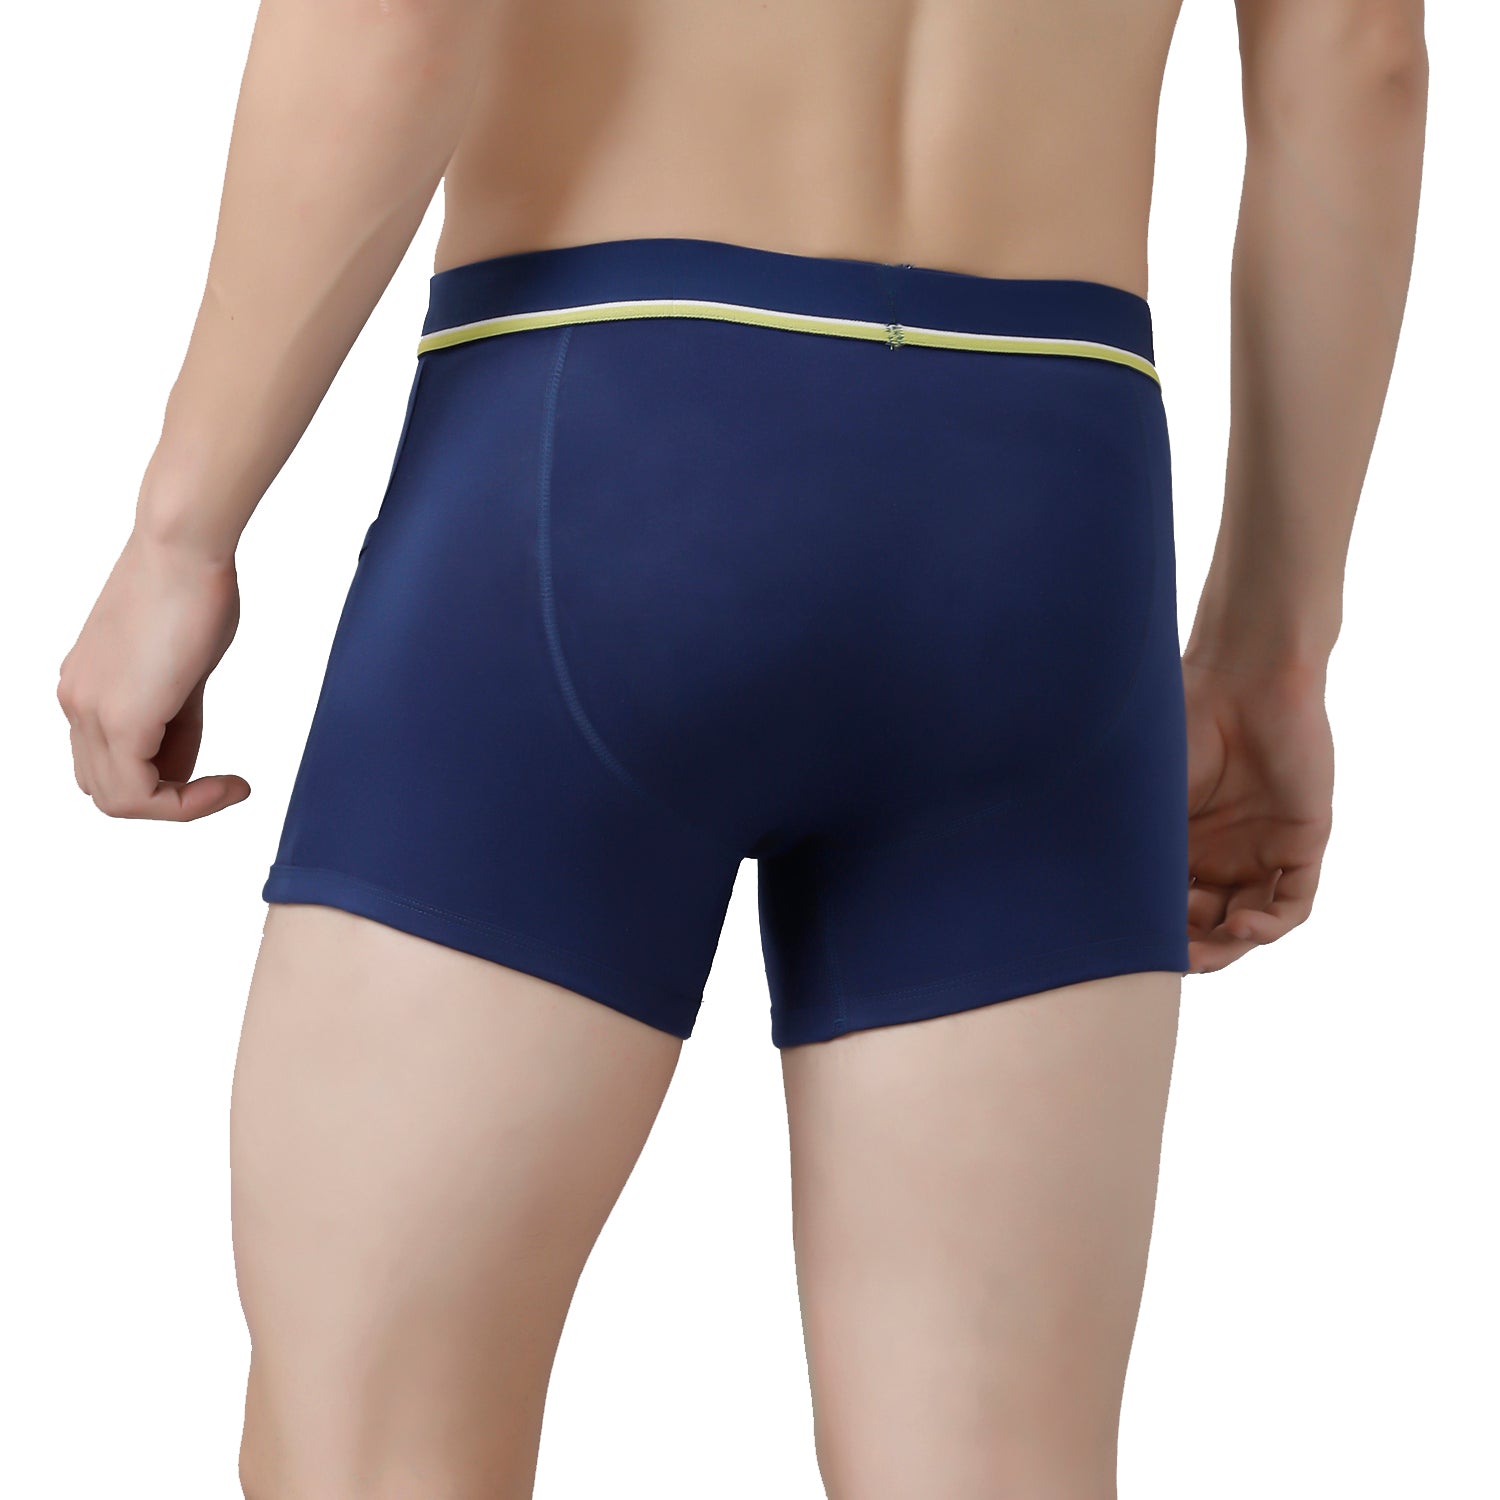 CP BRO Men's Solid Trunks with Exposed Waistband Value Pack - Blue (Pack of 2)